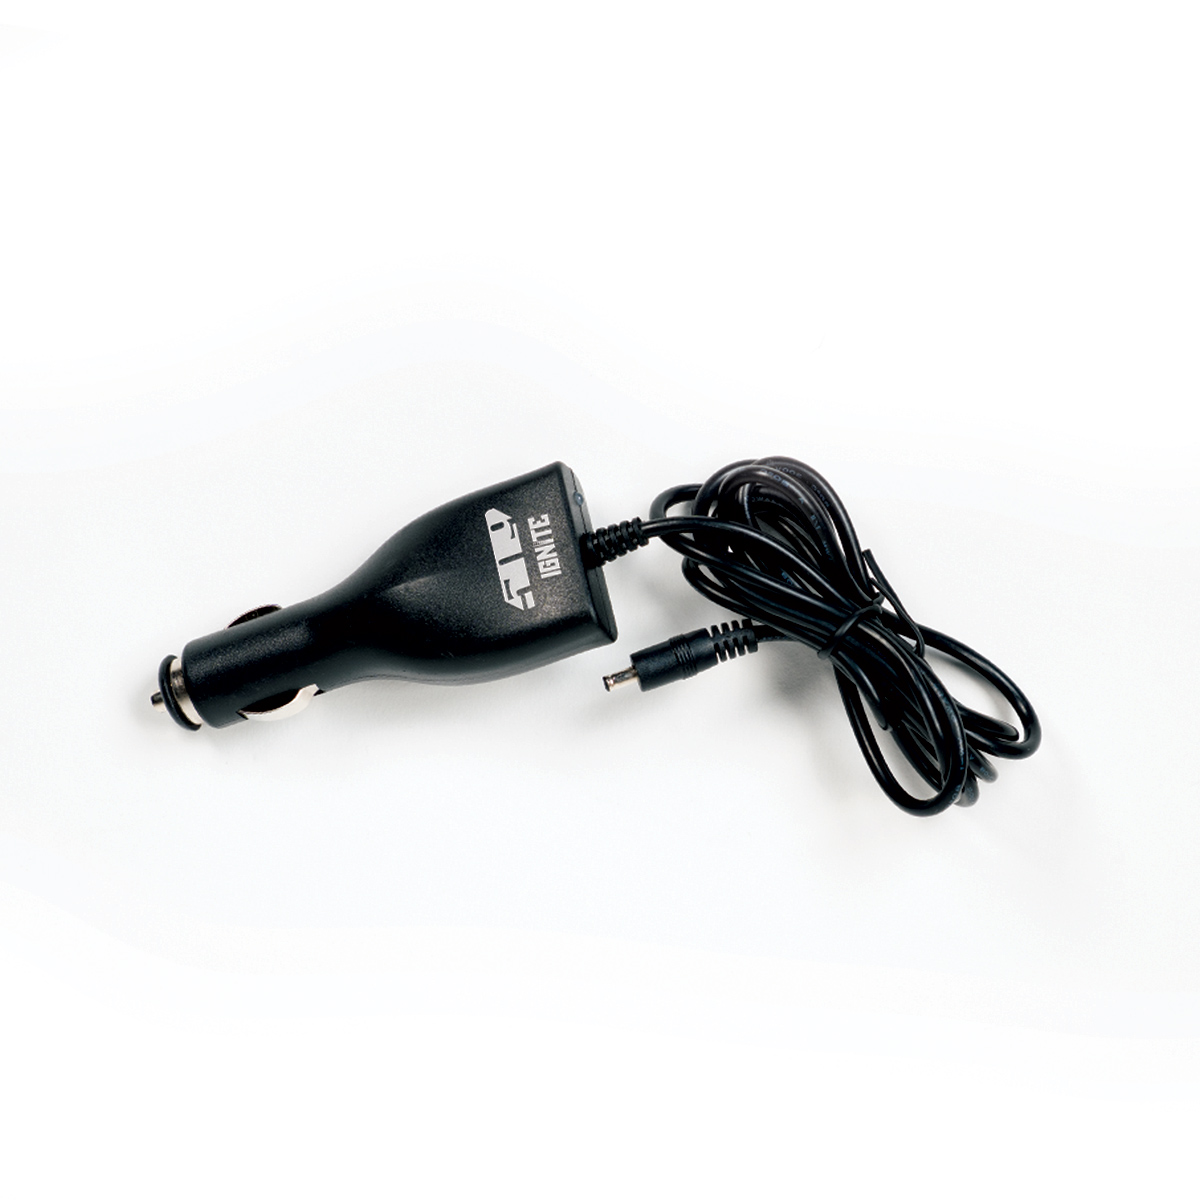 509 accessories 12 volt charger for ignite batteries accessories - snowmobile